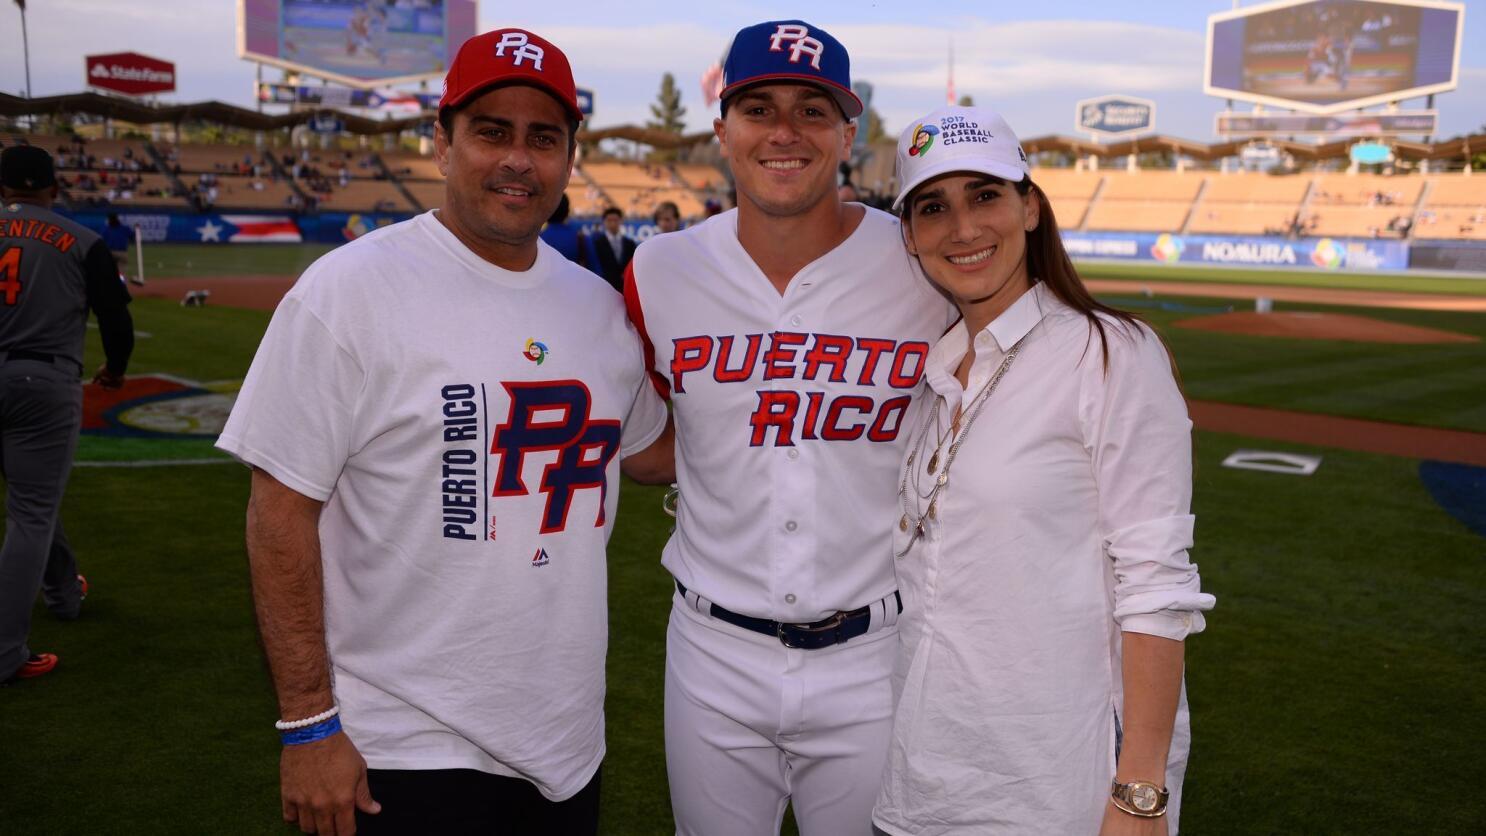 With his father by his side, Enrique Hernandez will be floating at